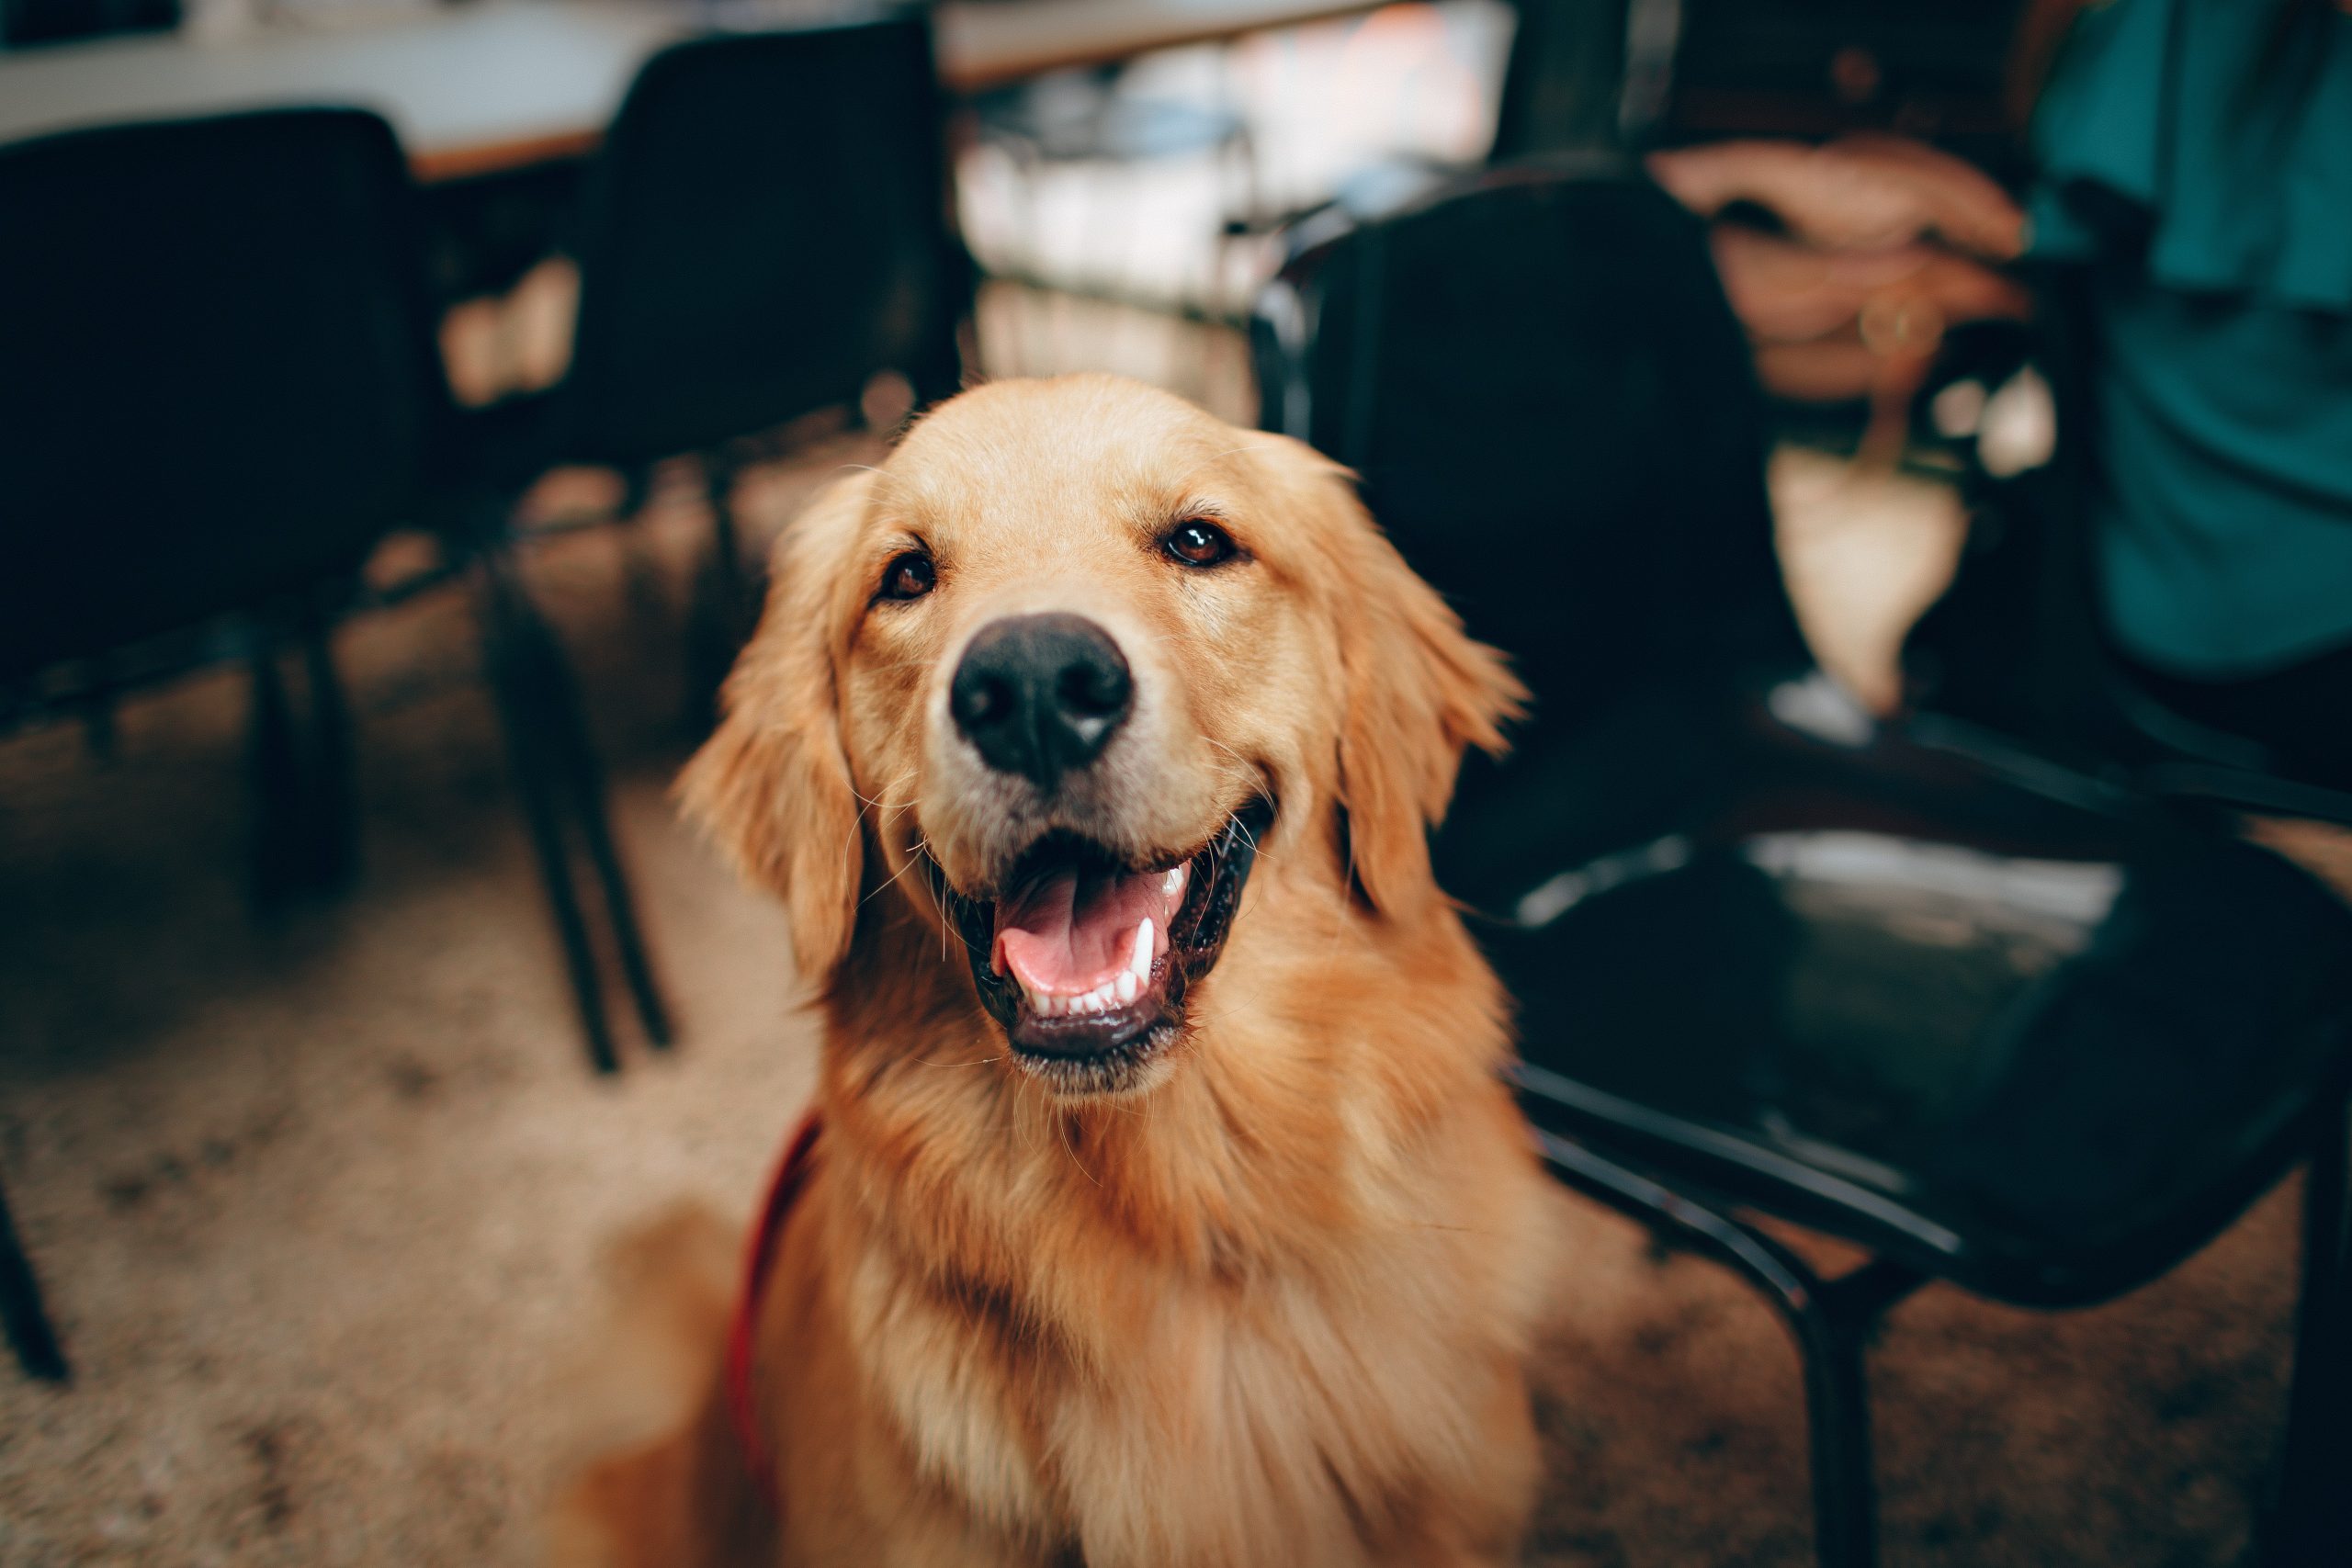 A smiling golden retriever sitting indoors with chairs and a table in the background.